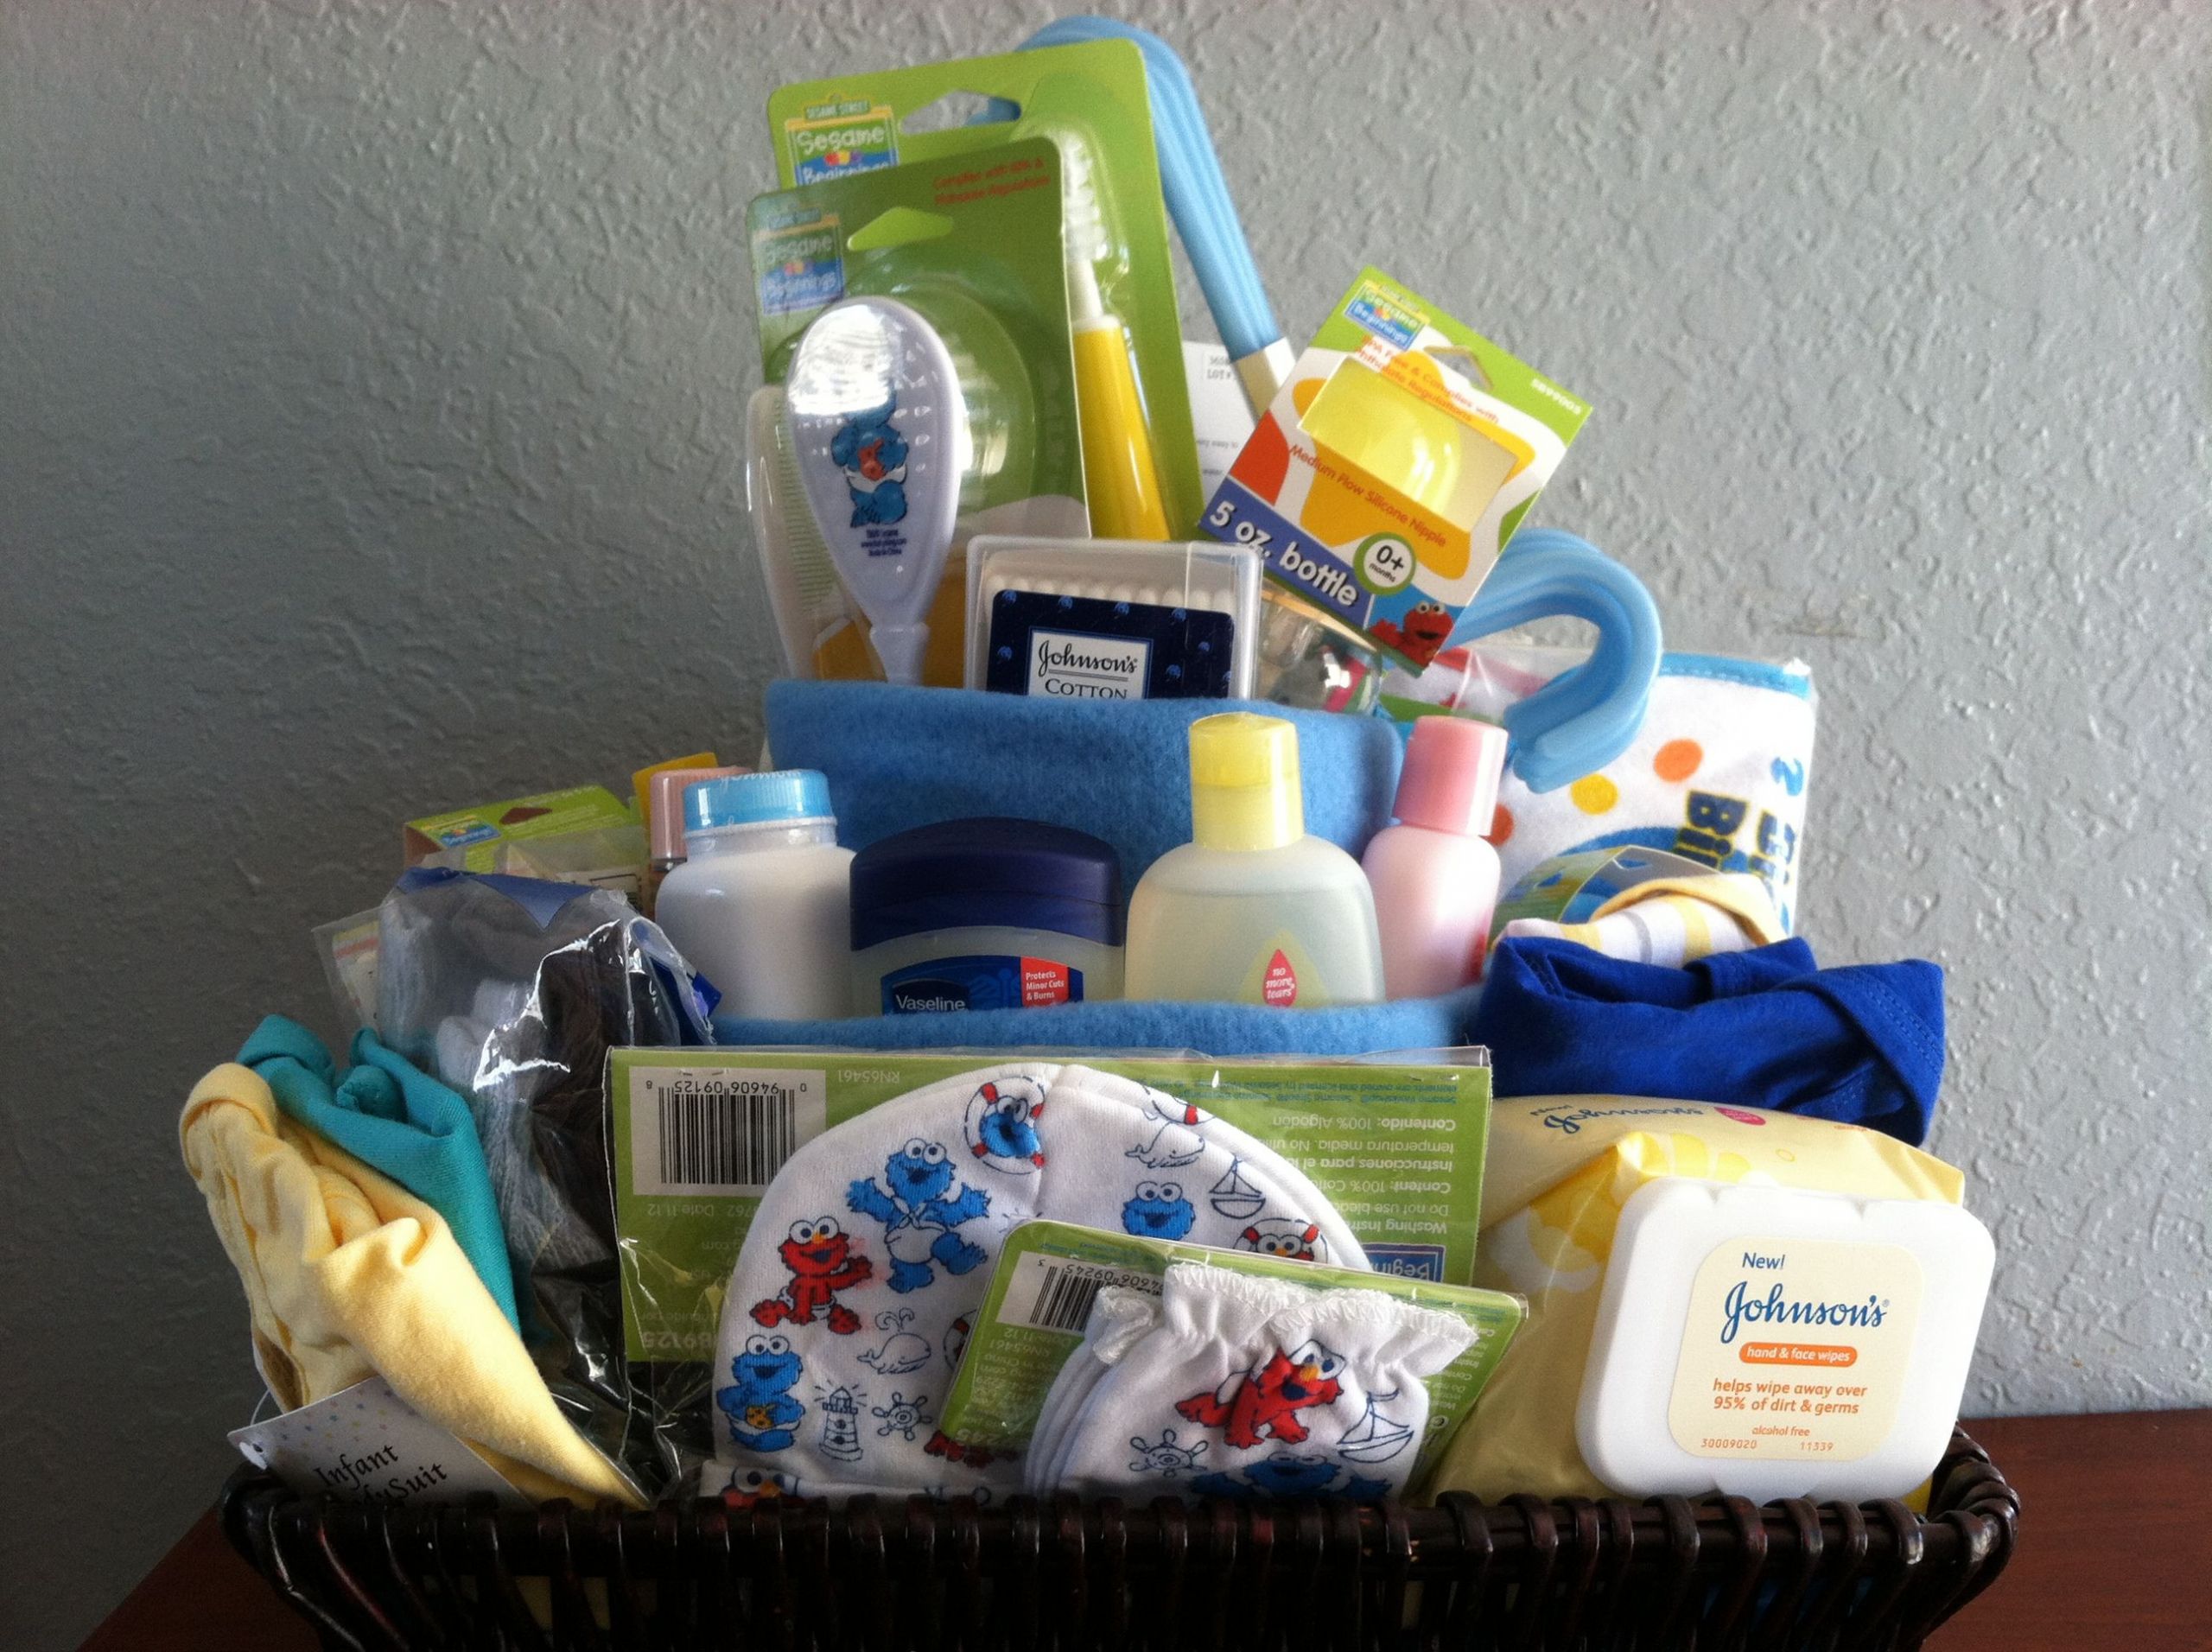 Unwrapped Gifts At Baby Shower
 Boy Gift Basket from Grandma for Baby Shower Unwrapped